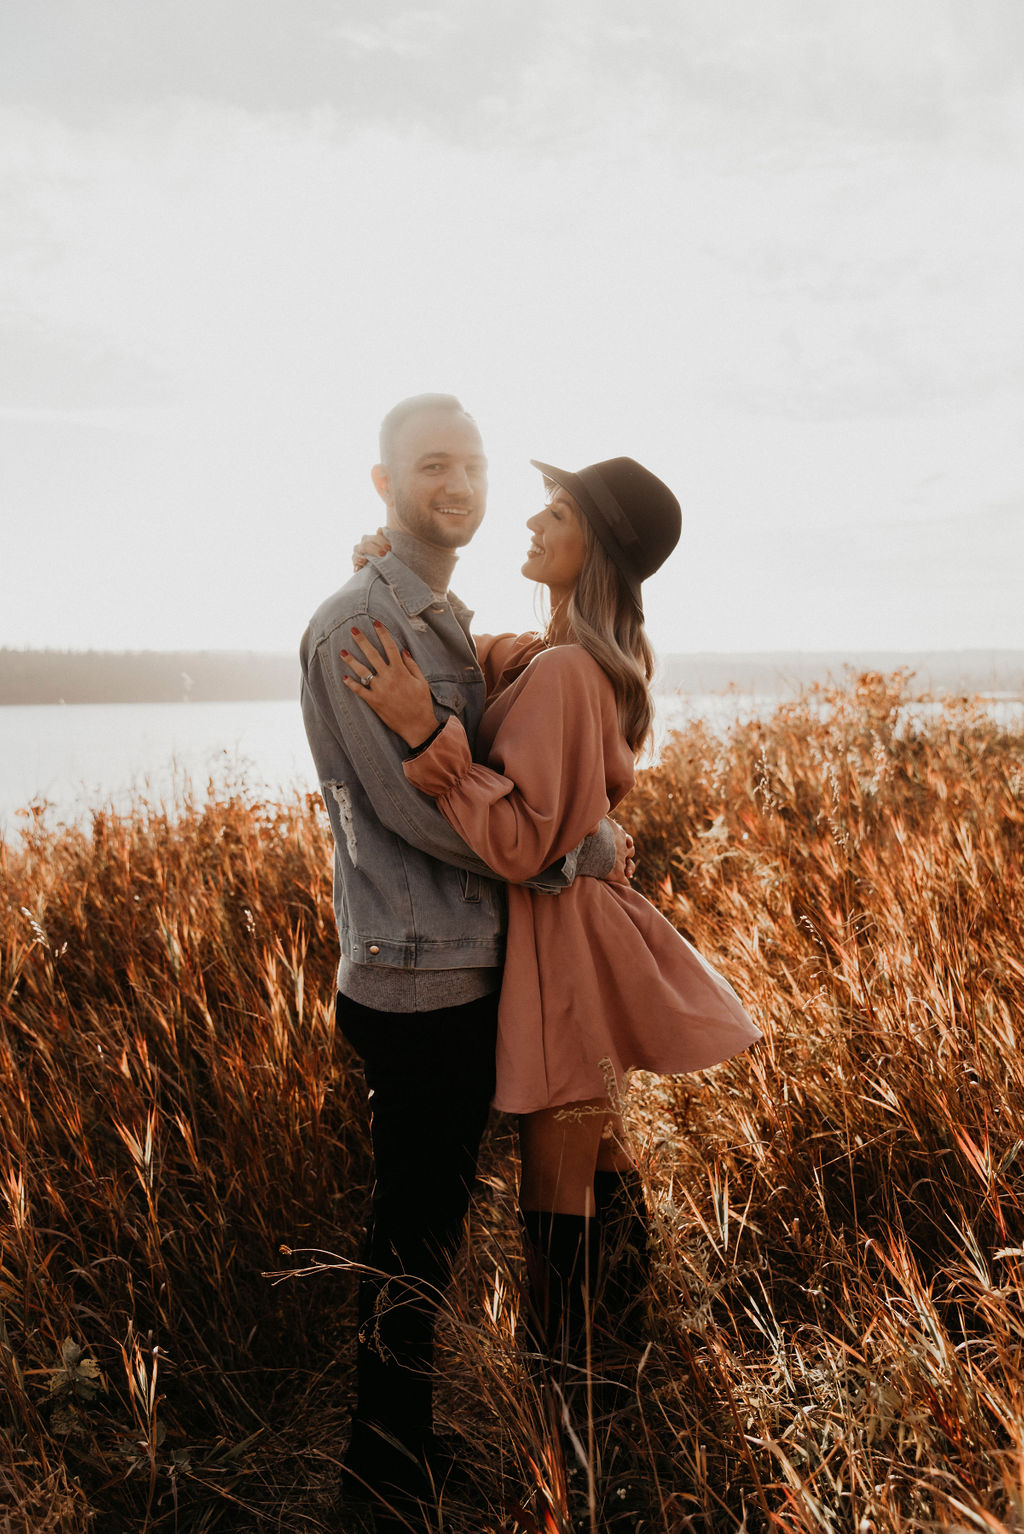 Sunset engagement session outfit inspiration with a denim jacket and cute blush dress